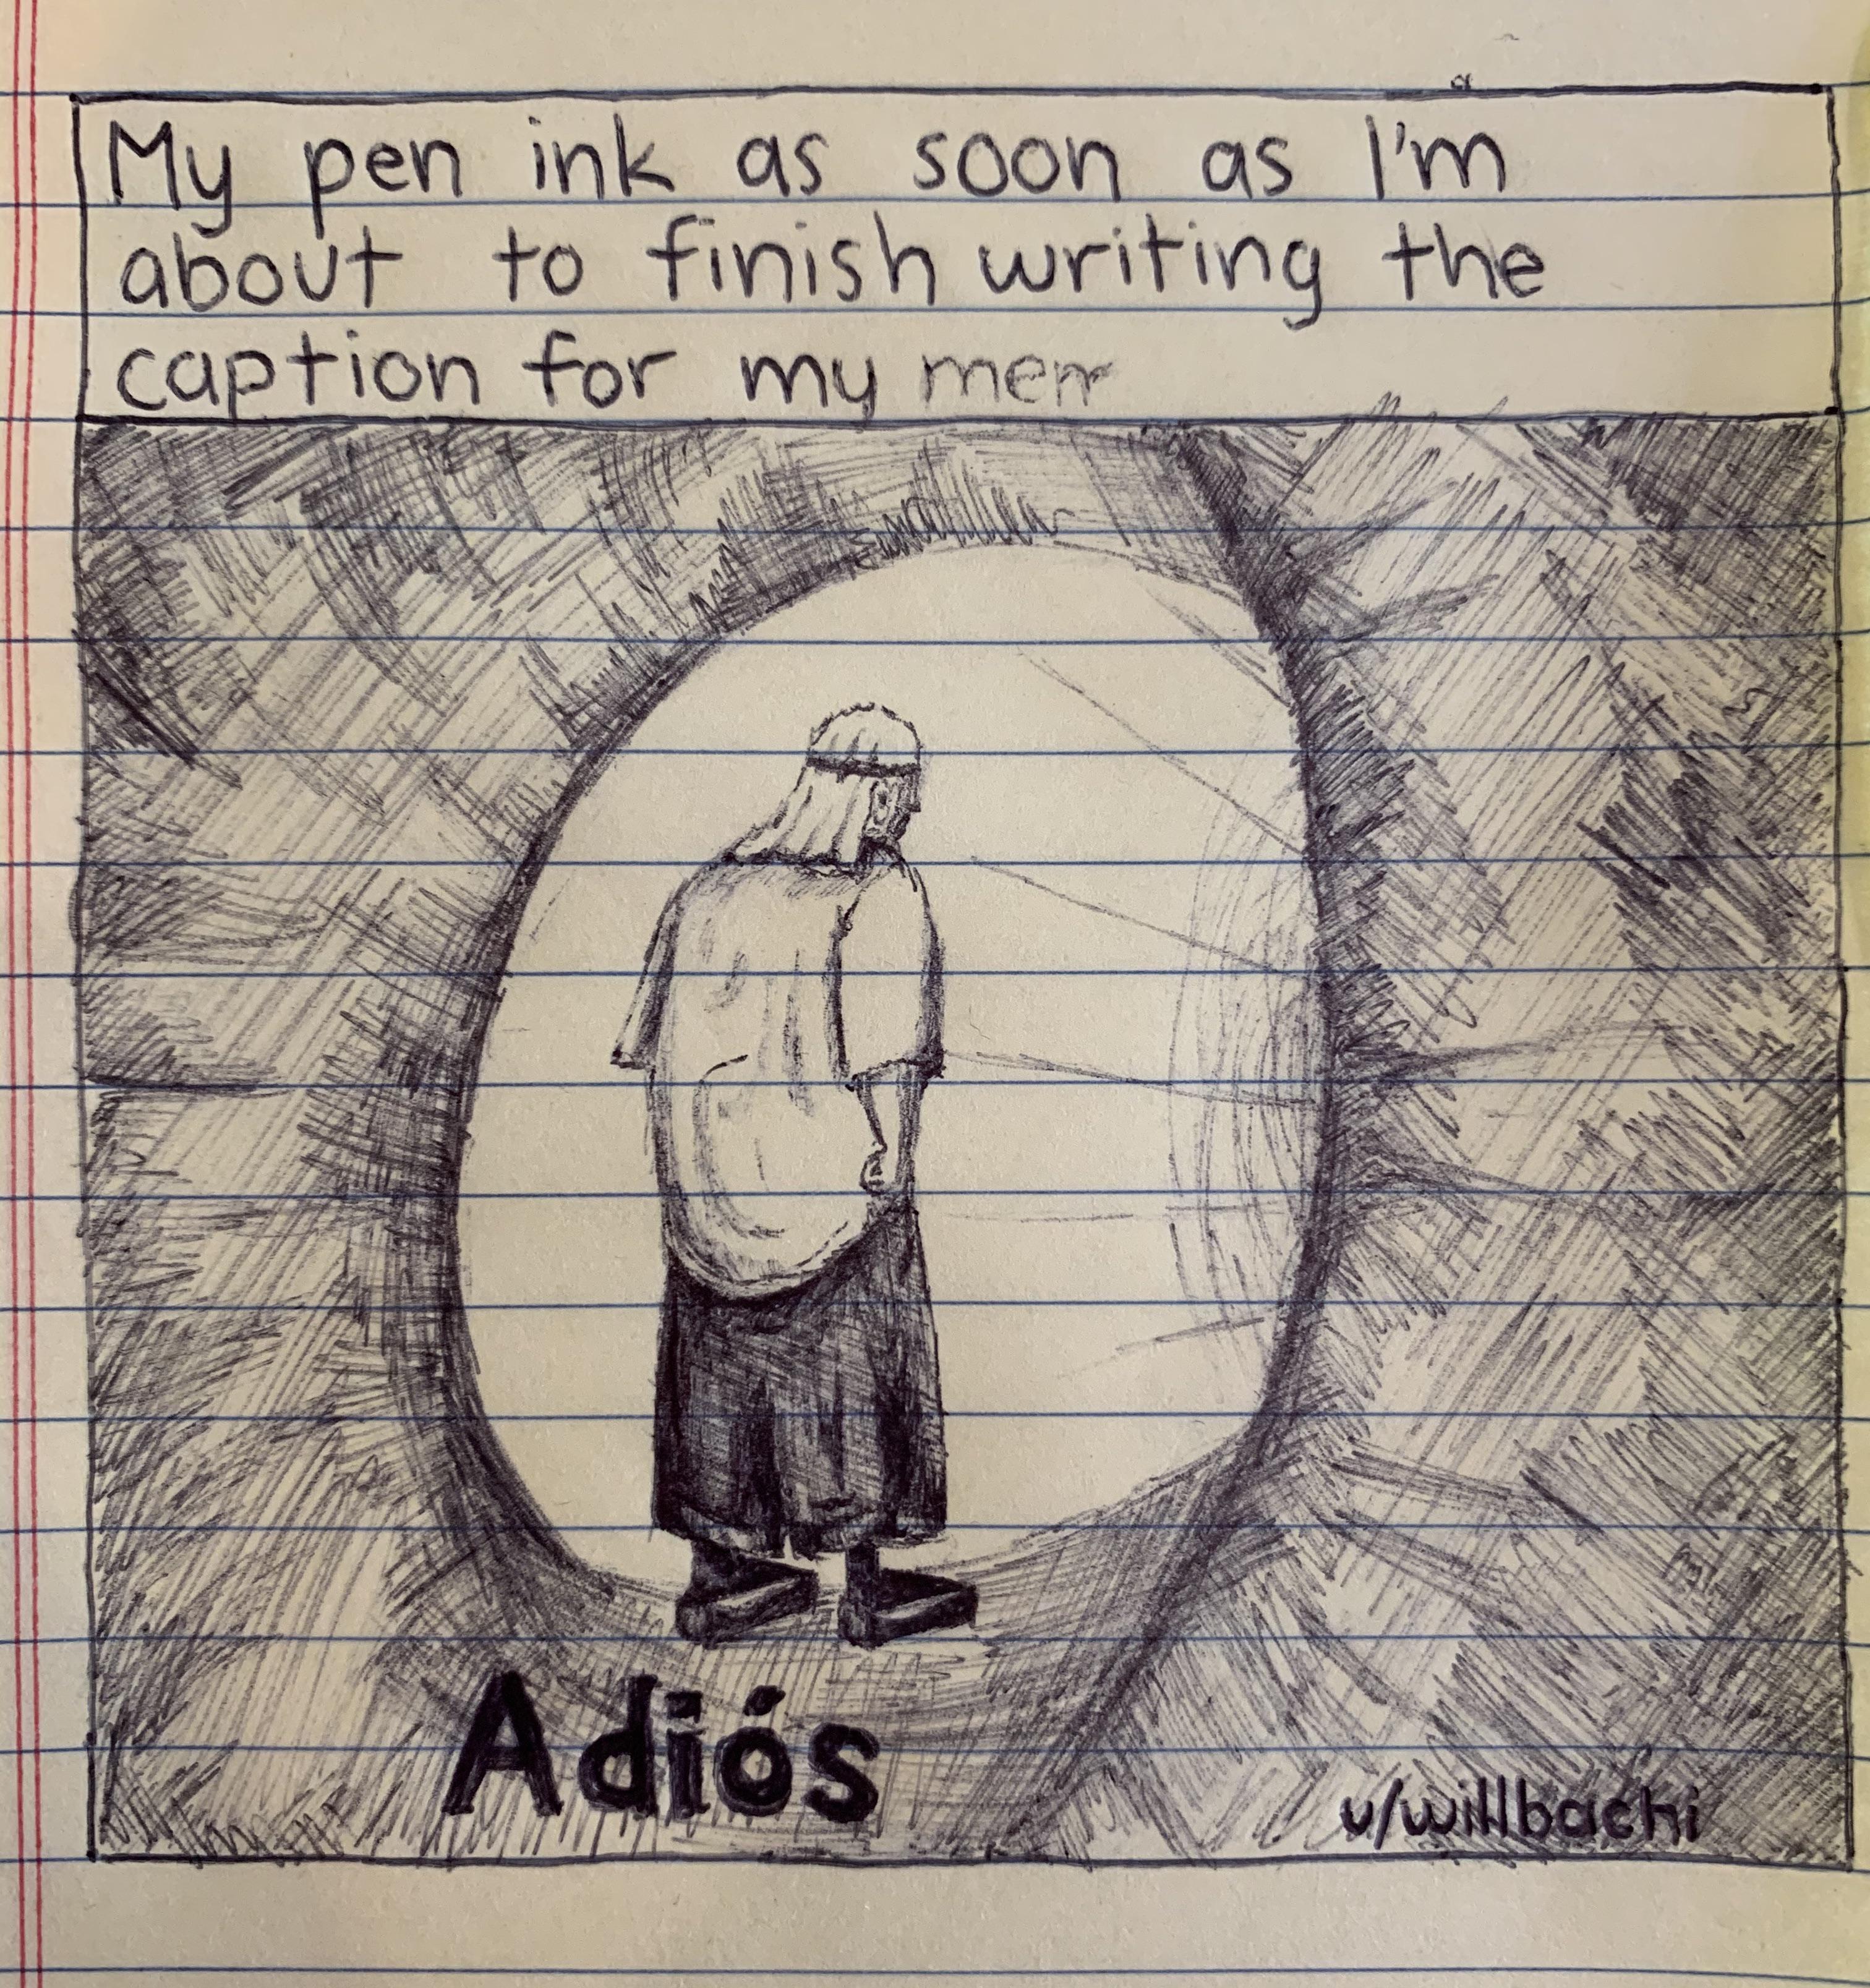 cartoon - My pen ink as soon as I'm about to finish writing the caption for my mer Adis uwillbachi